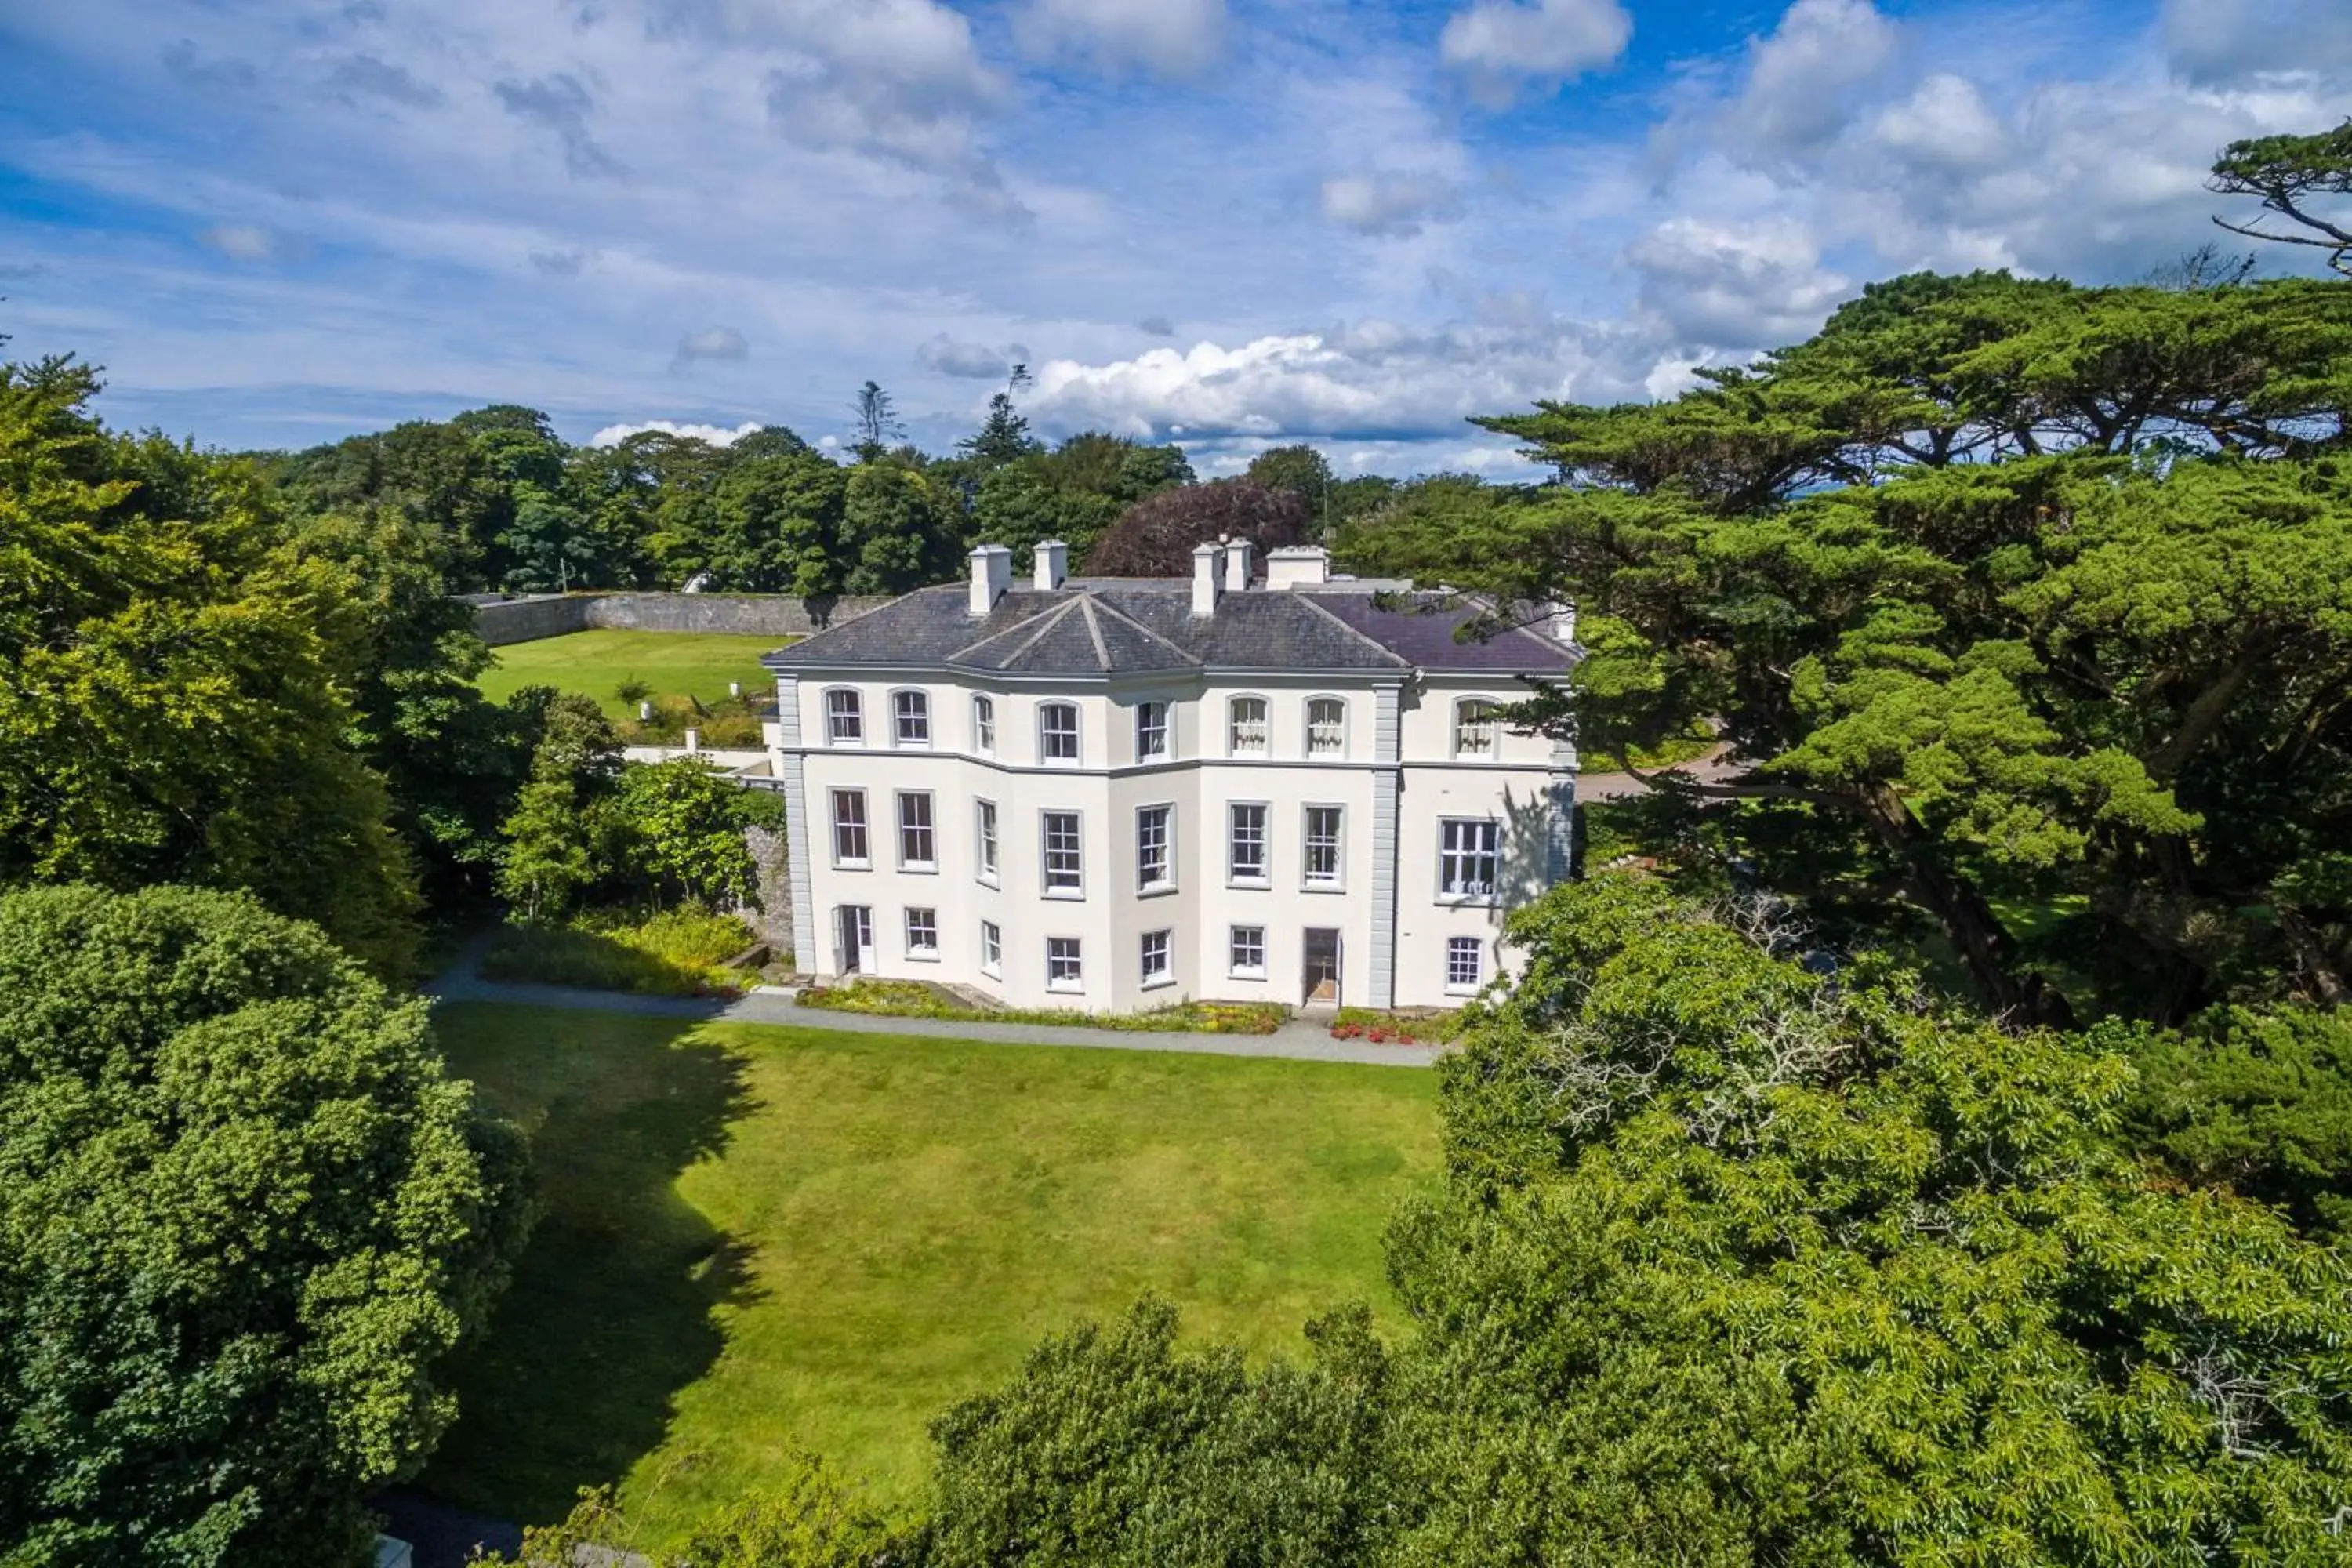 Property building, Bird's-eye View in Liss Ard Estate